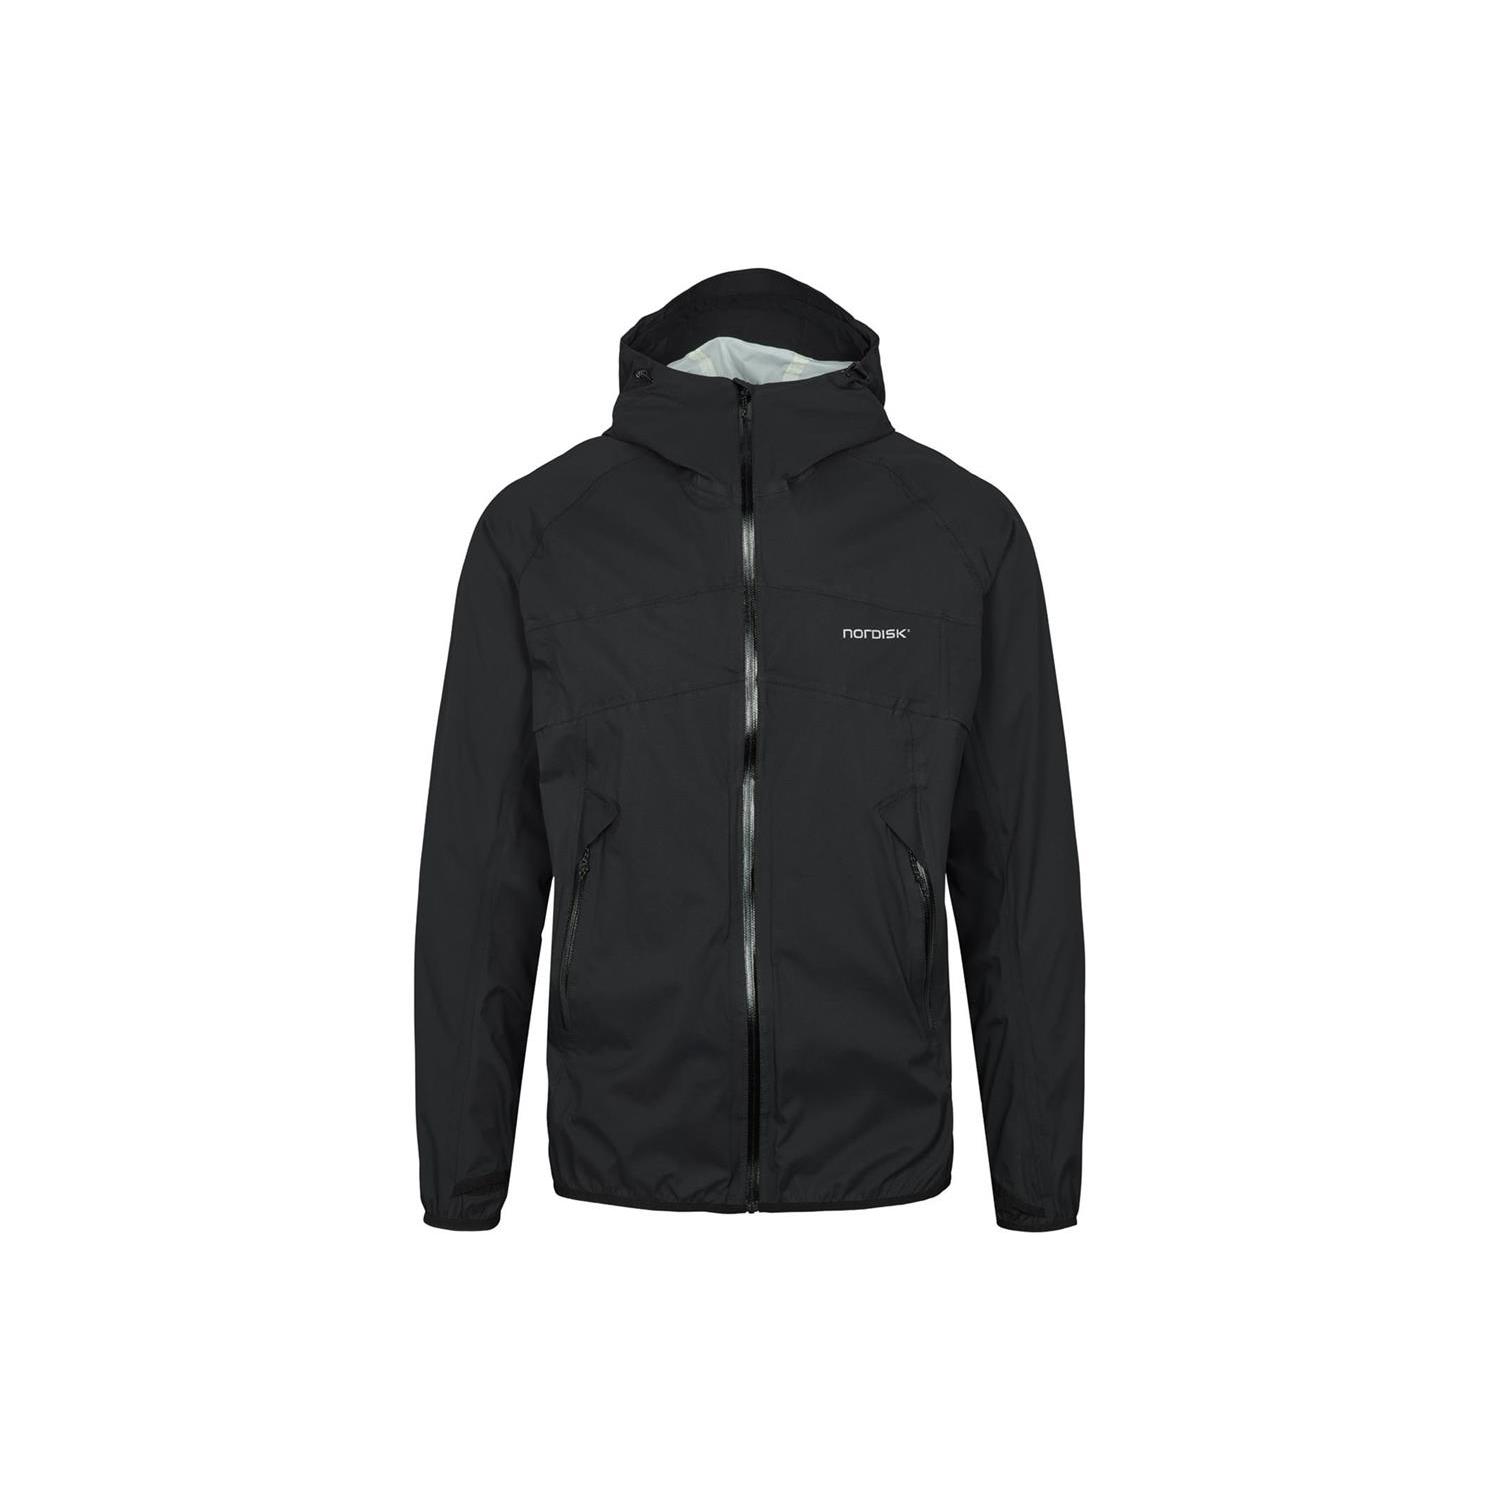 Y by Nordisk Medby Ultralight 3-Layer Jacket